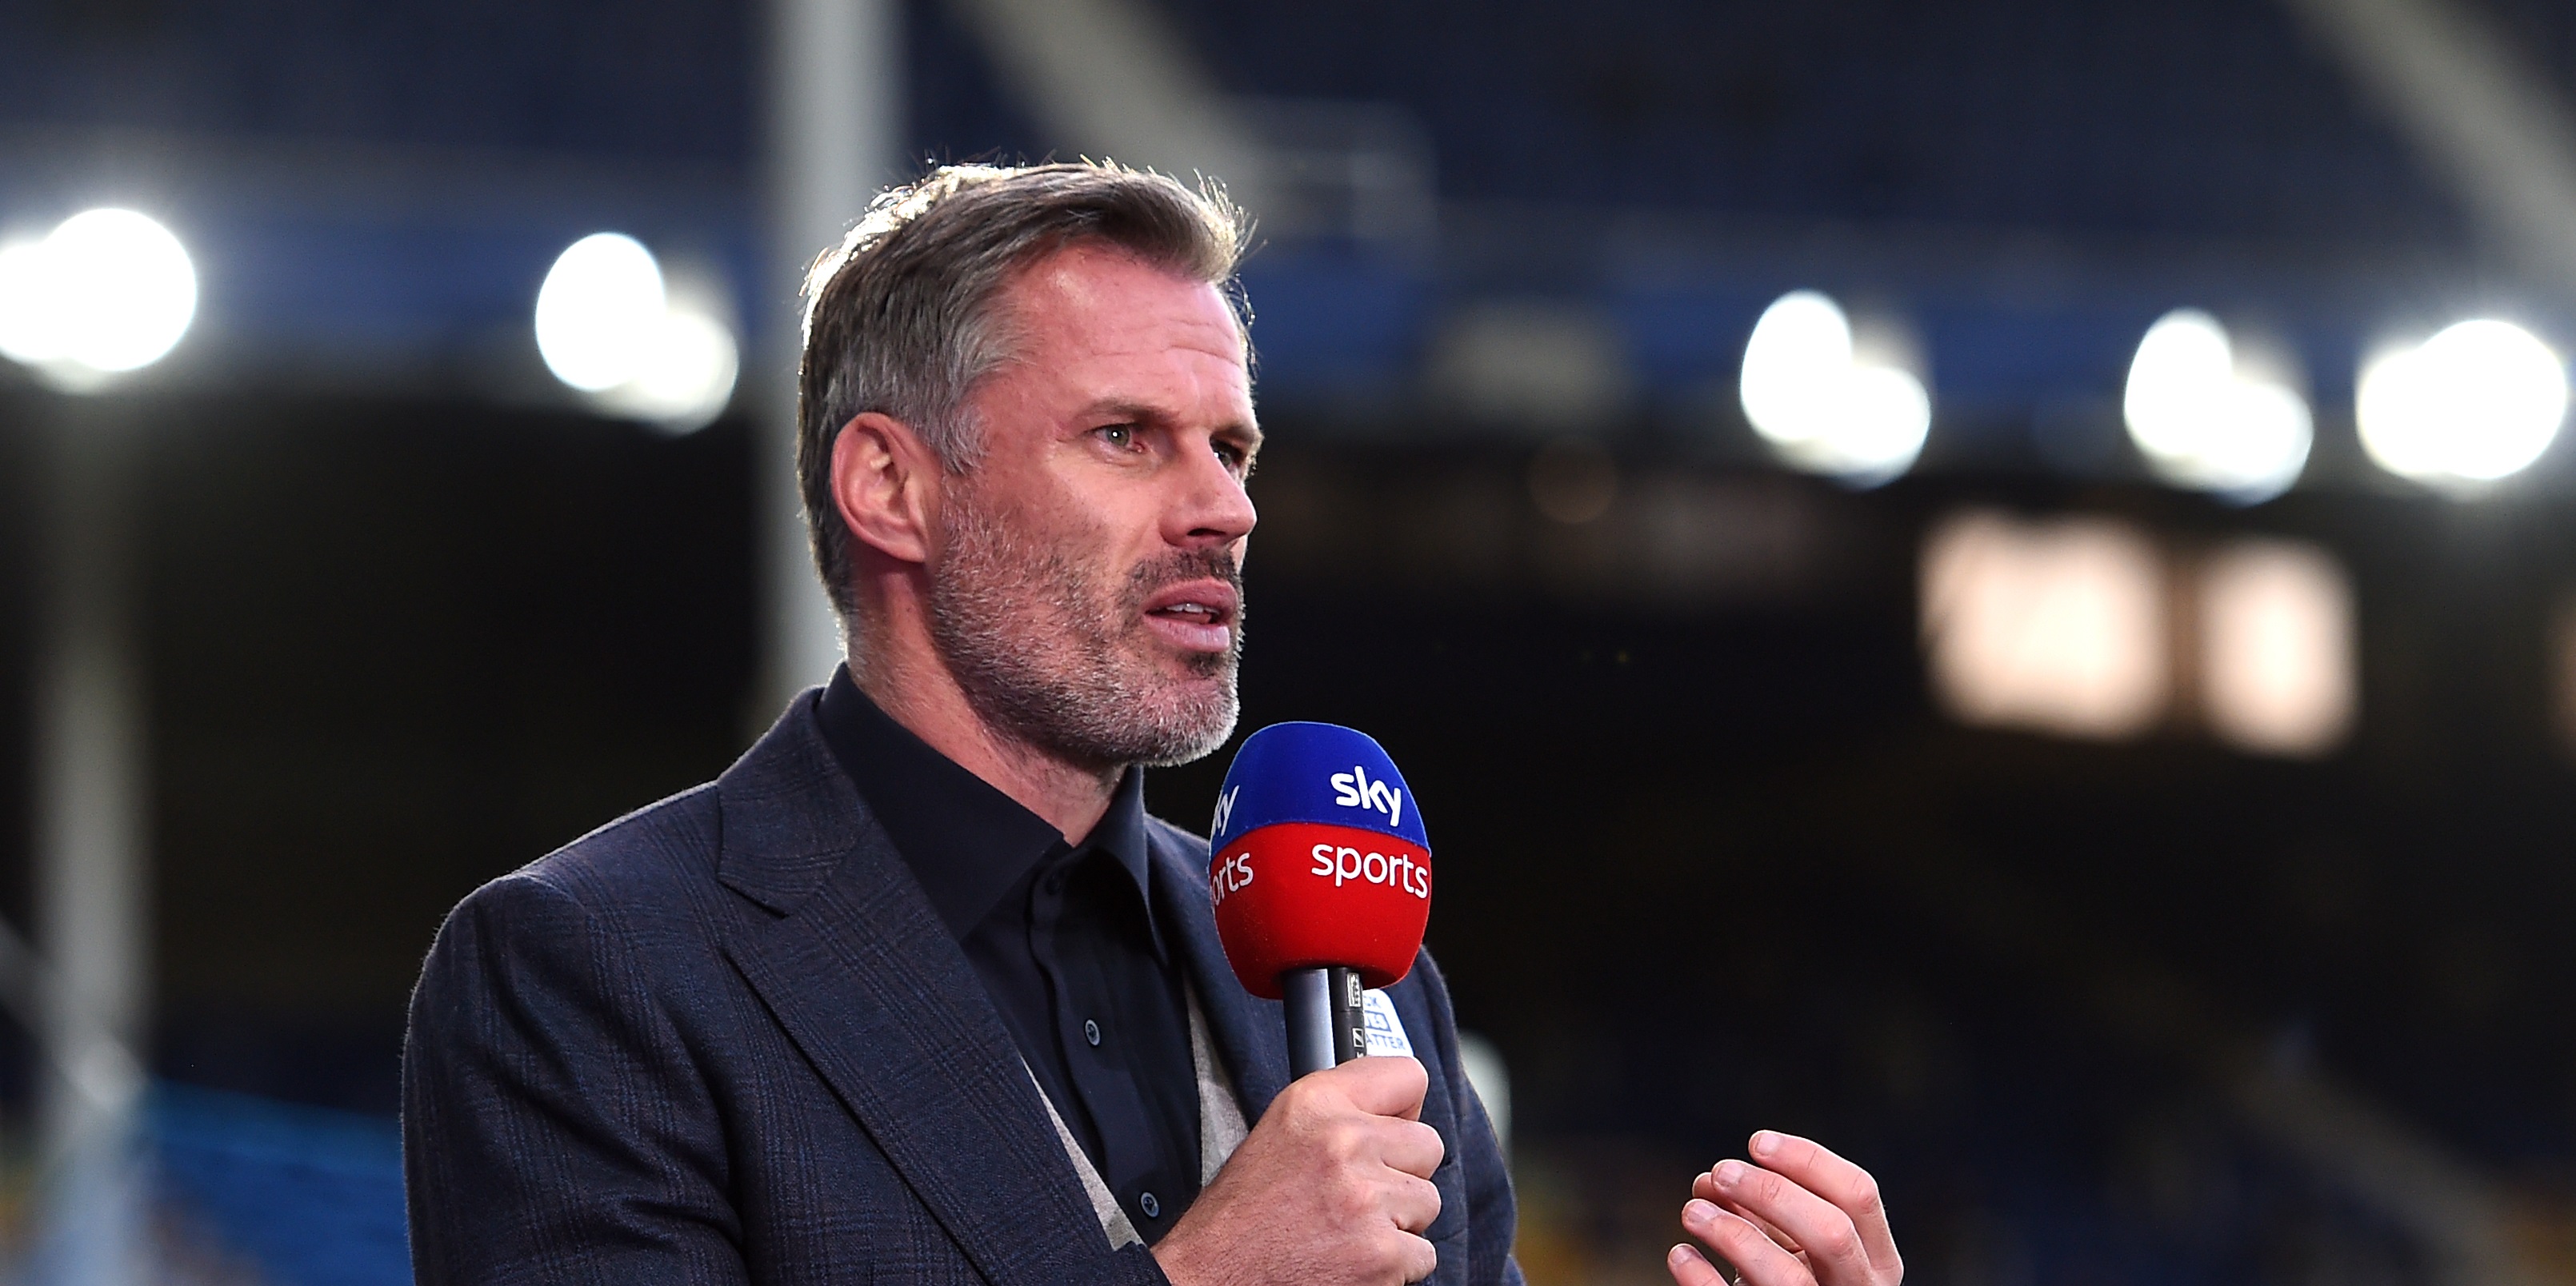 Jamie Carragher reveals his ‘highlight of the night’ from Liverpool’s defeat of Inter Milan at the San Siro